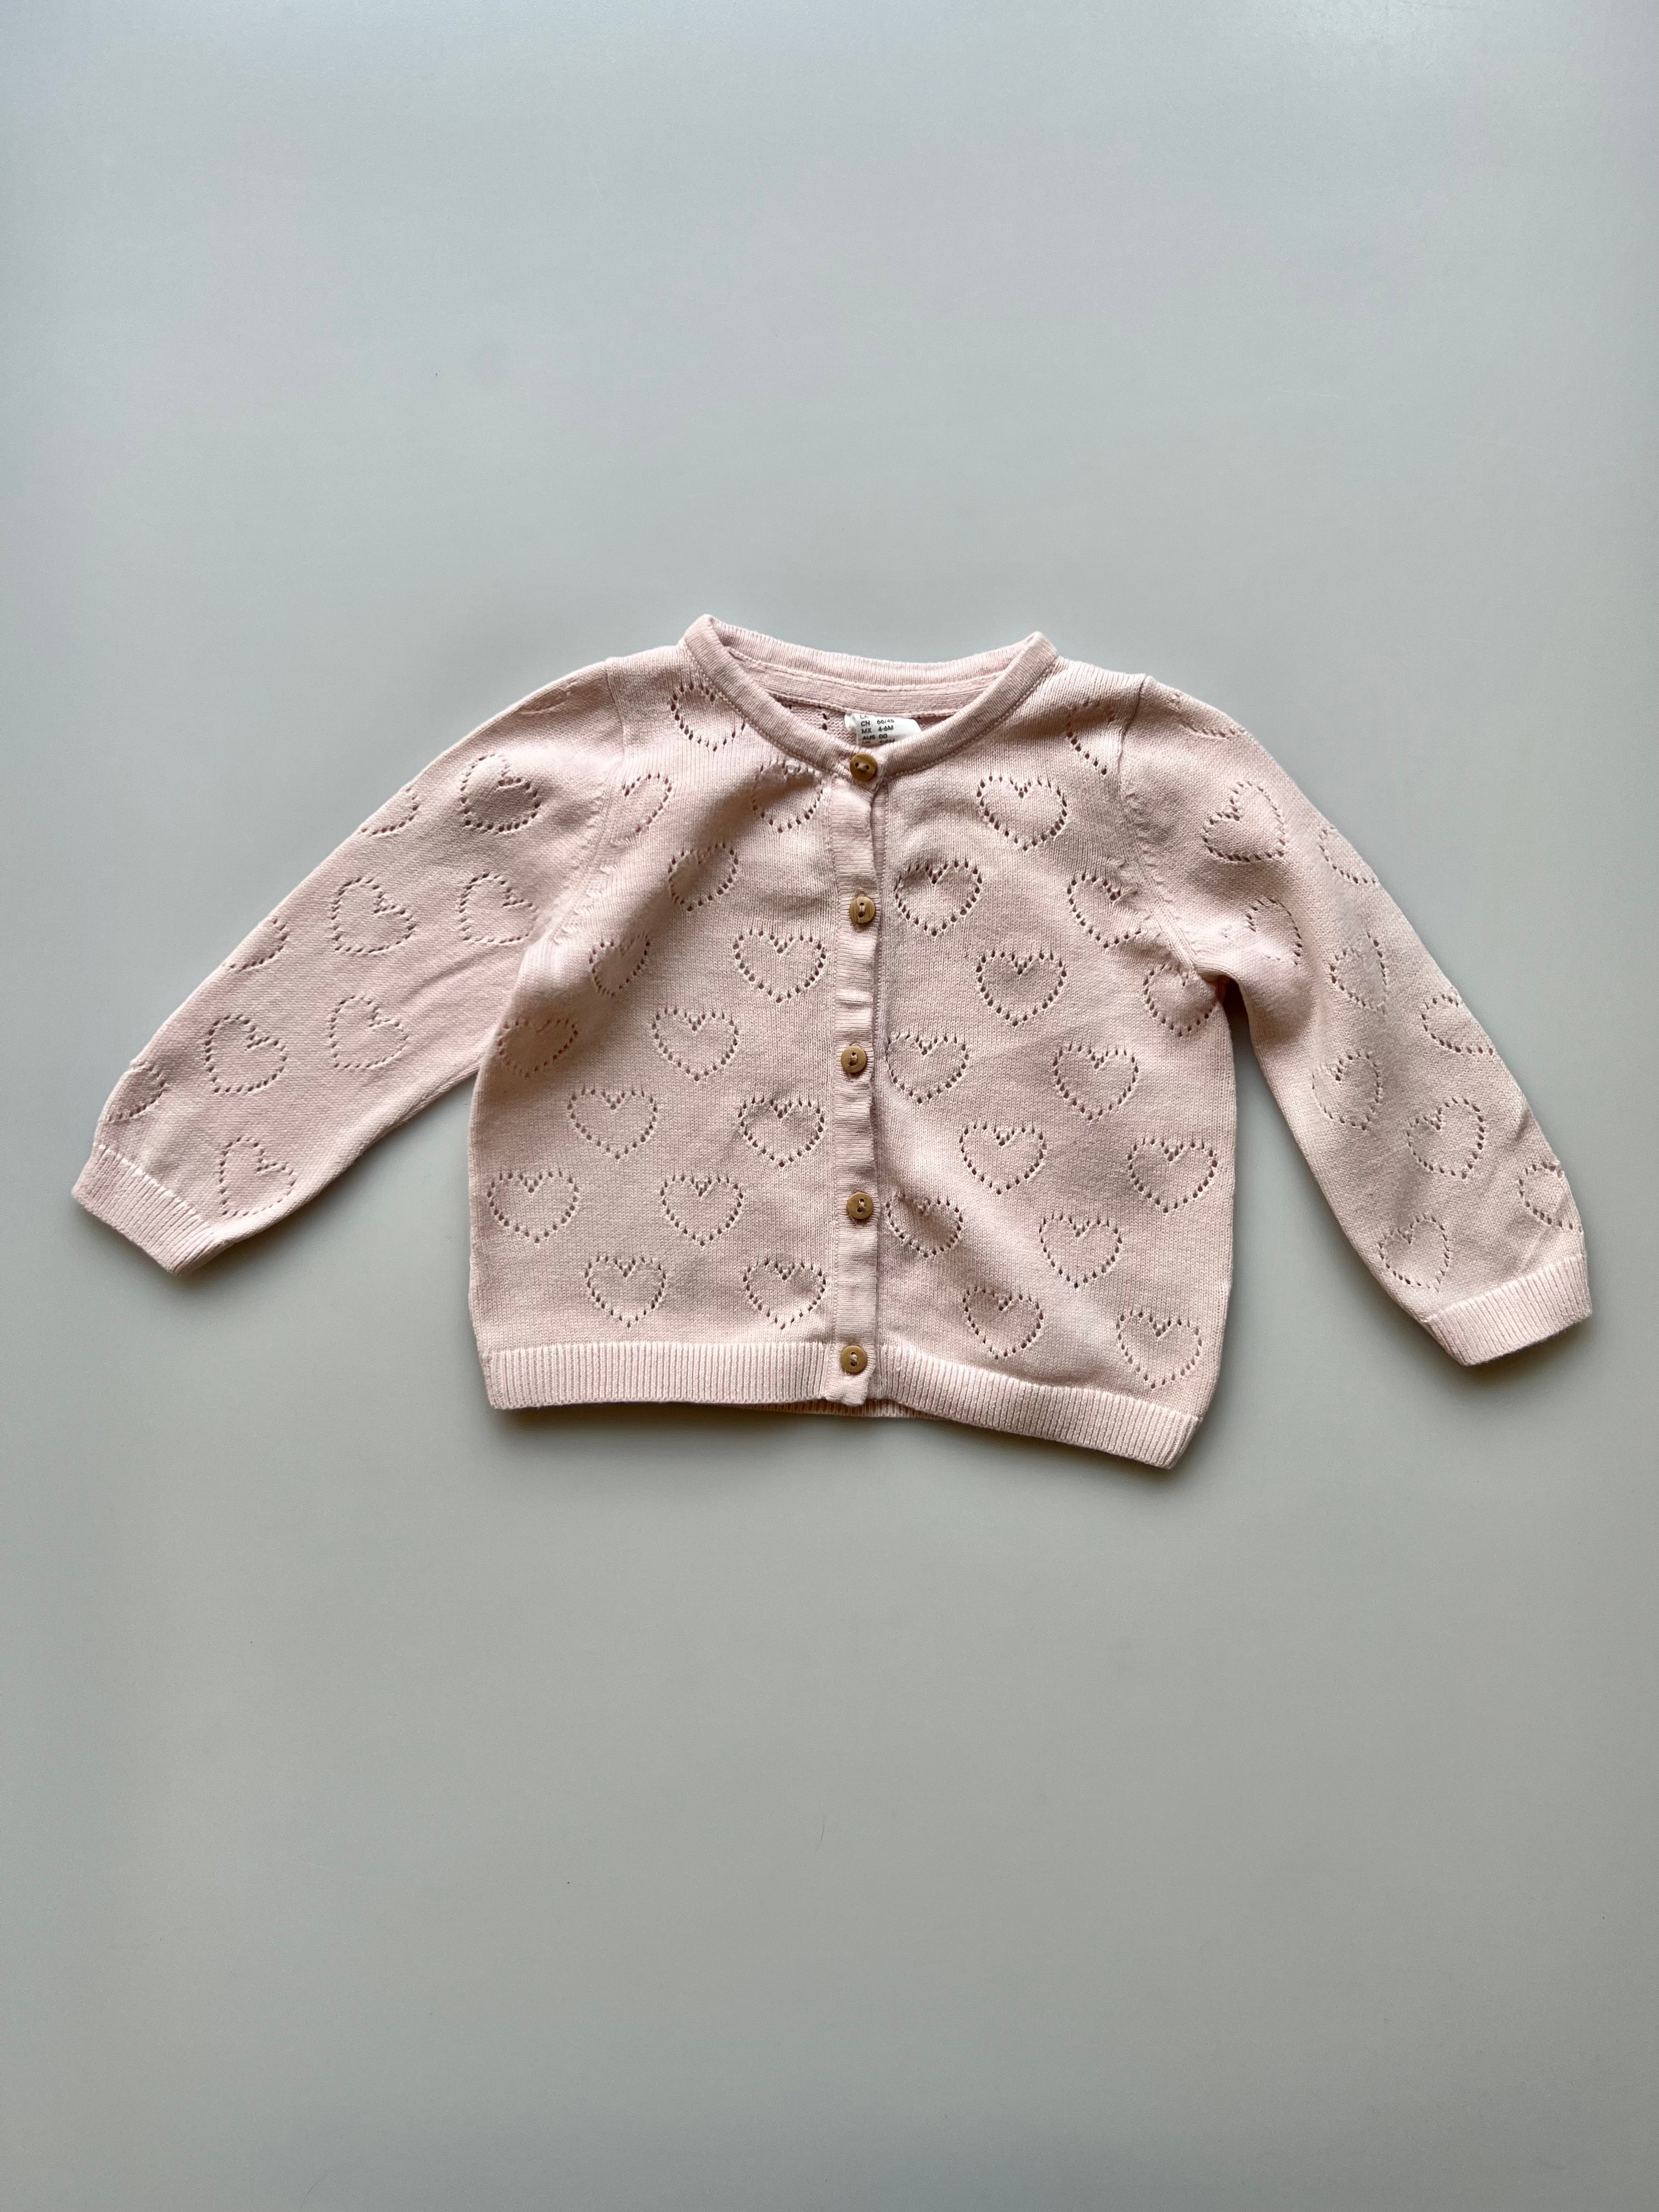 H&M Pink Hearts Cardigan 4-6 Months